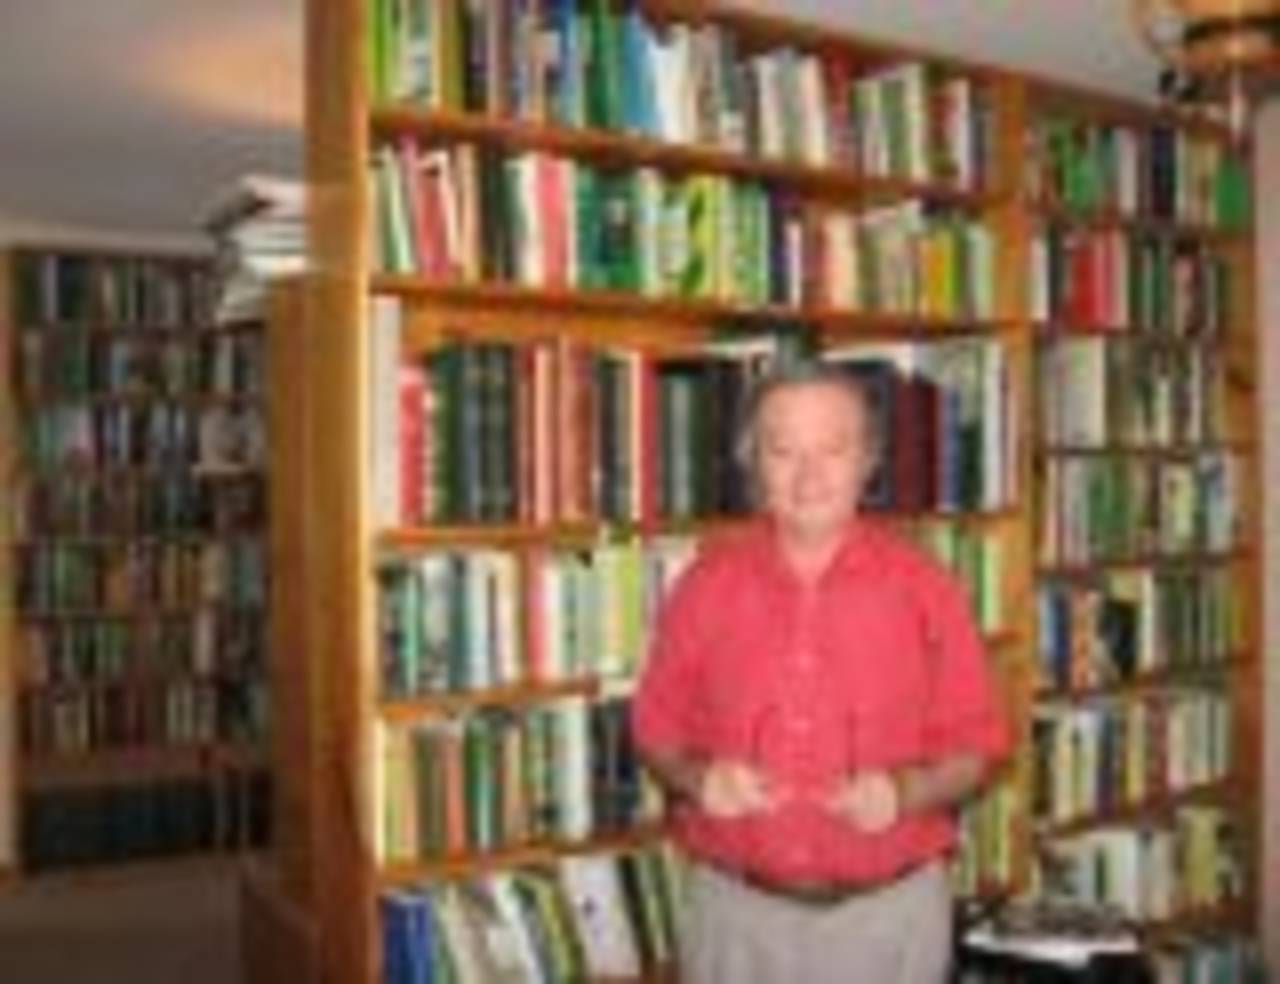 Roger Page with his book collection, Melbourne, February 1, 2008